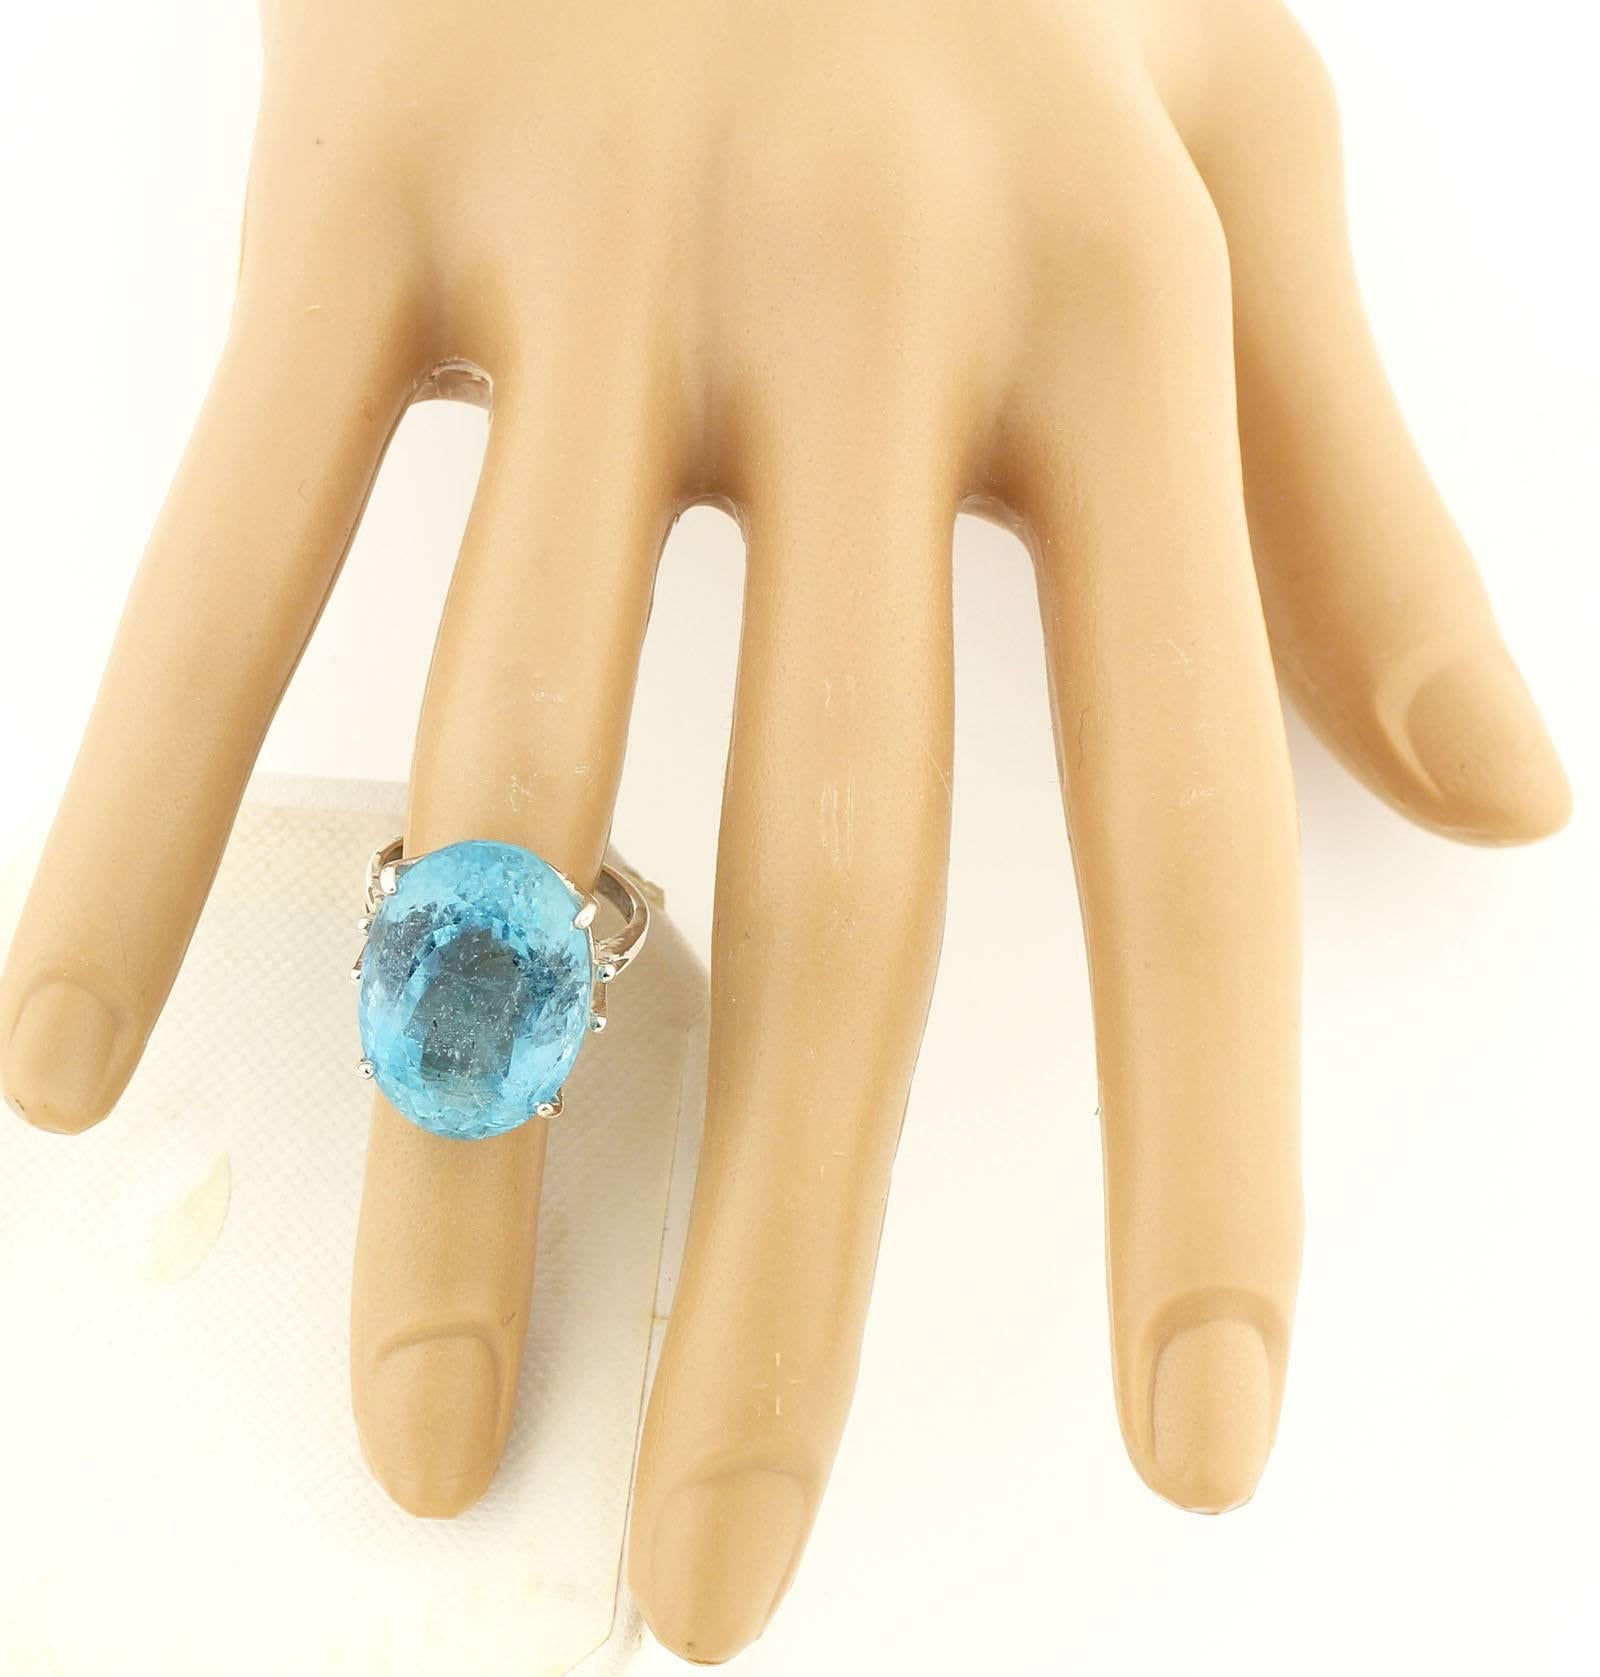 This unique beautiful Aqua Blue 25.16 Carat natural oval Aquamarine from the famous Santa Maria mine in Brasil is set in a Sterling Silver ring.  It measures 21.3 mm x 15.68 mm and the ring is a sizable 7.  This gemstone is practically flawless and